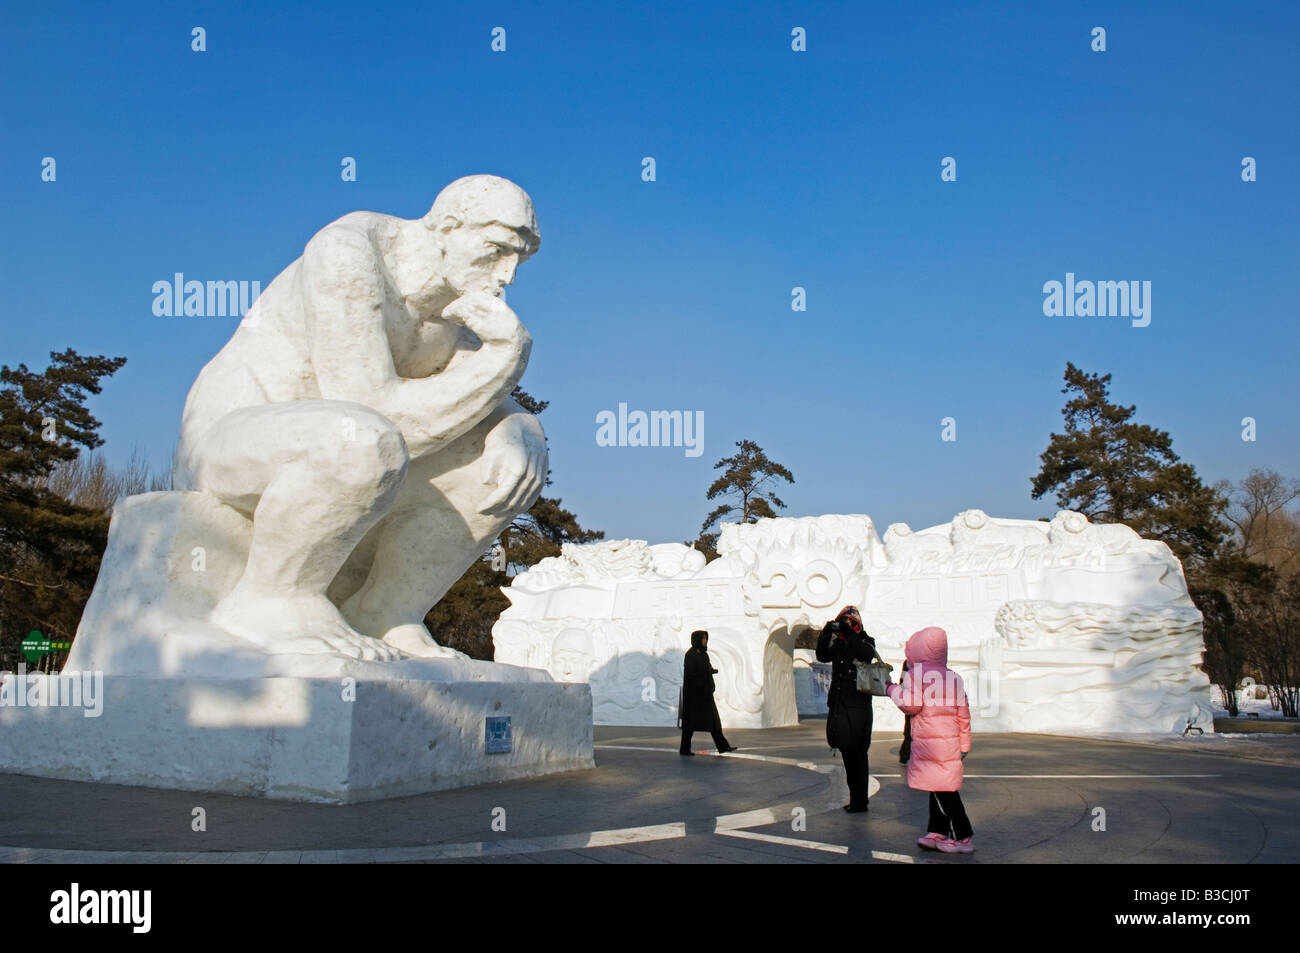 China, Northeast China, Heilongjiang Province, Harbin City. Snow and Ice Sculpture Festival at Sun Island Park. Visitors standing beneath a thinking man sculpture. Stock Photo